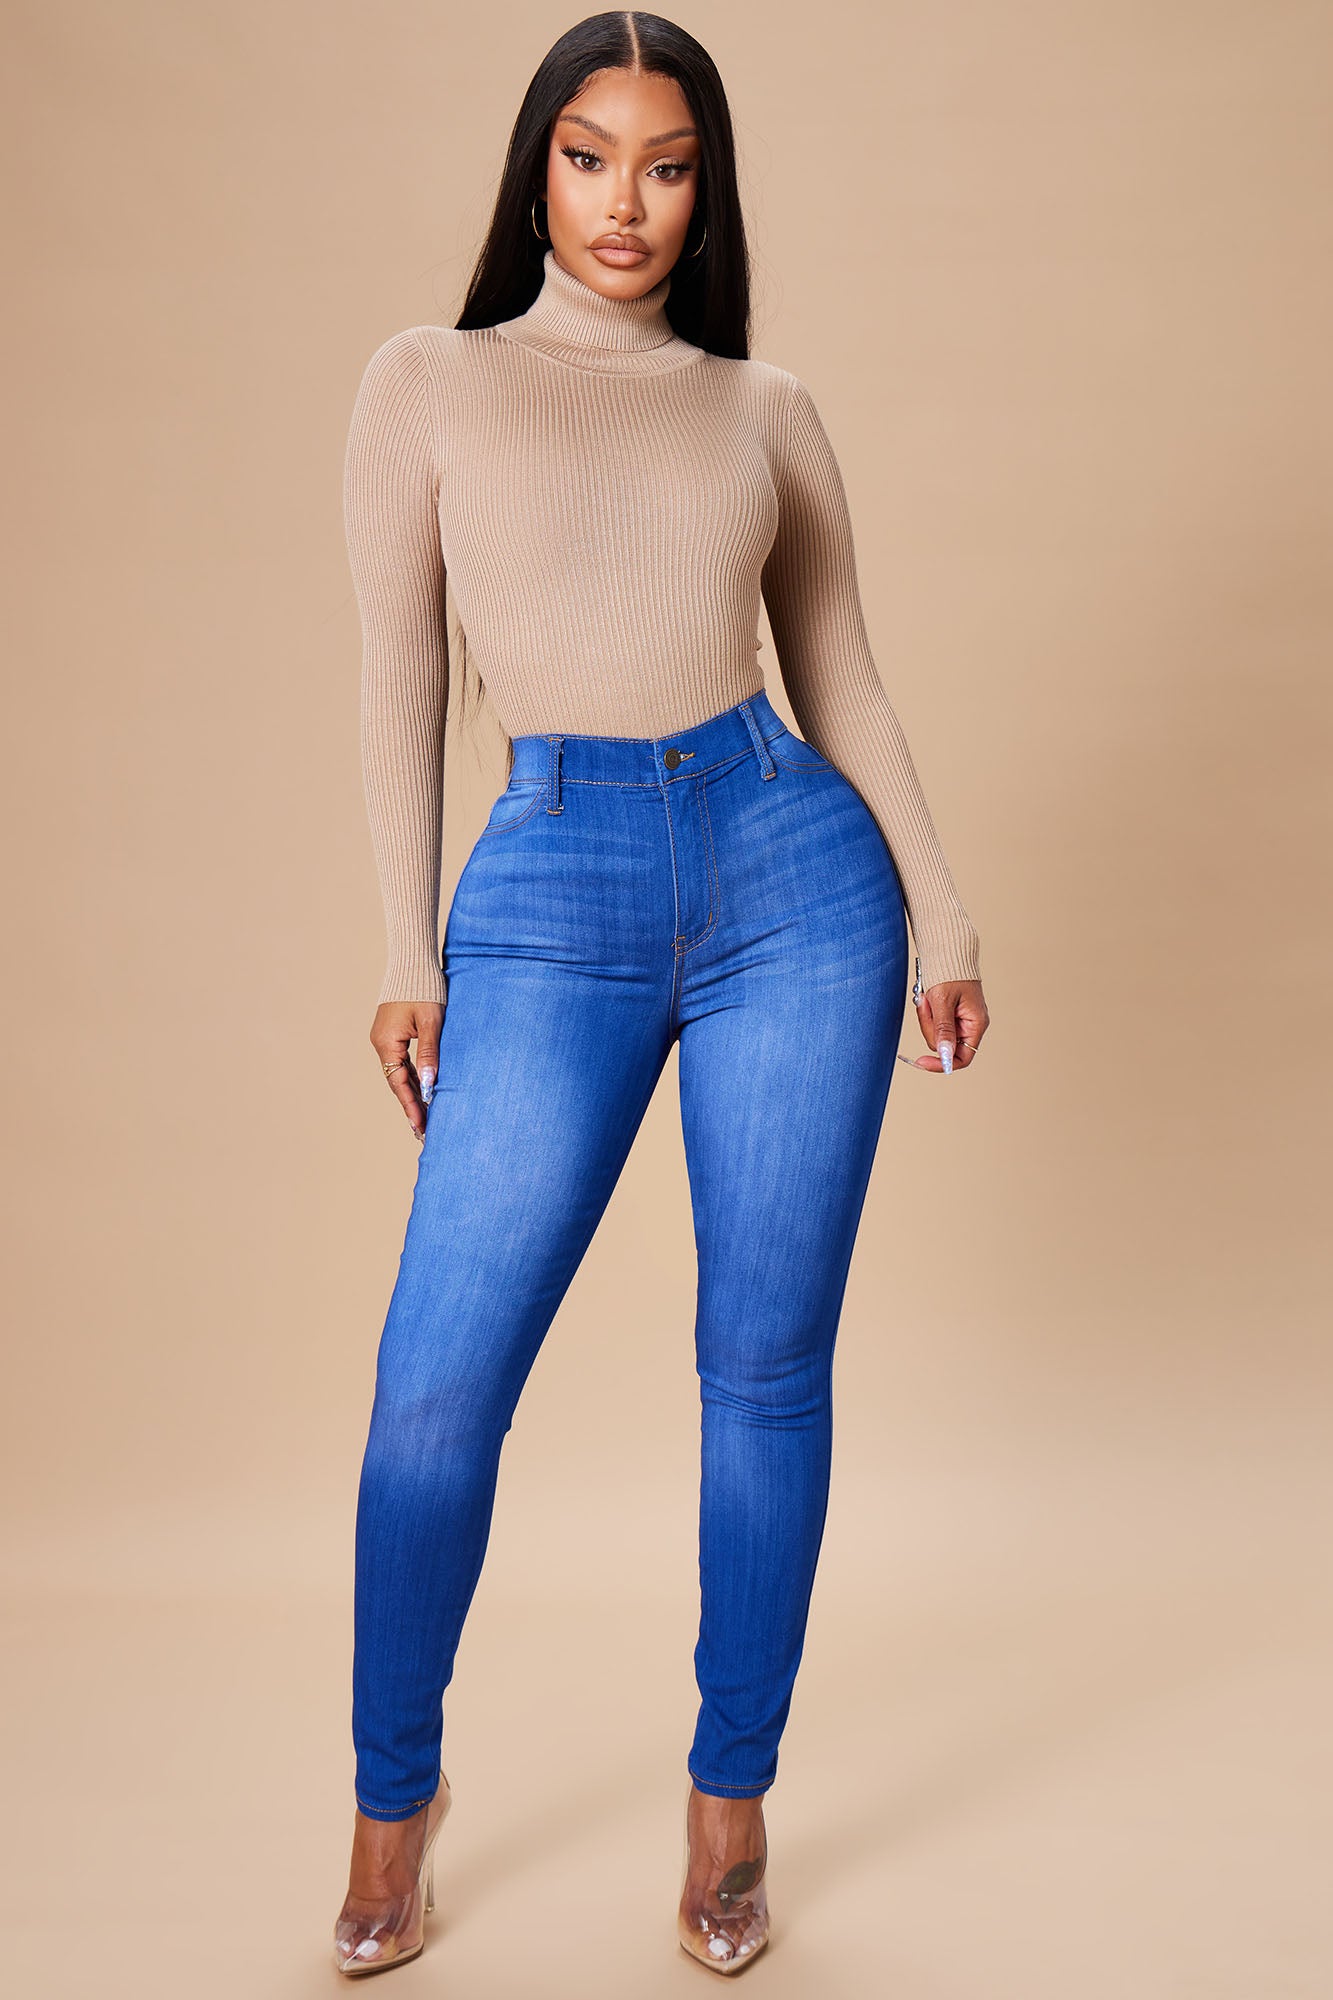 Highly recommend @FashionNovaCURVE jeans 😍 #fashionnova #fashionnovac, Fashion Nova